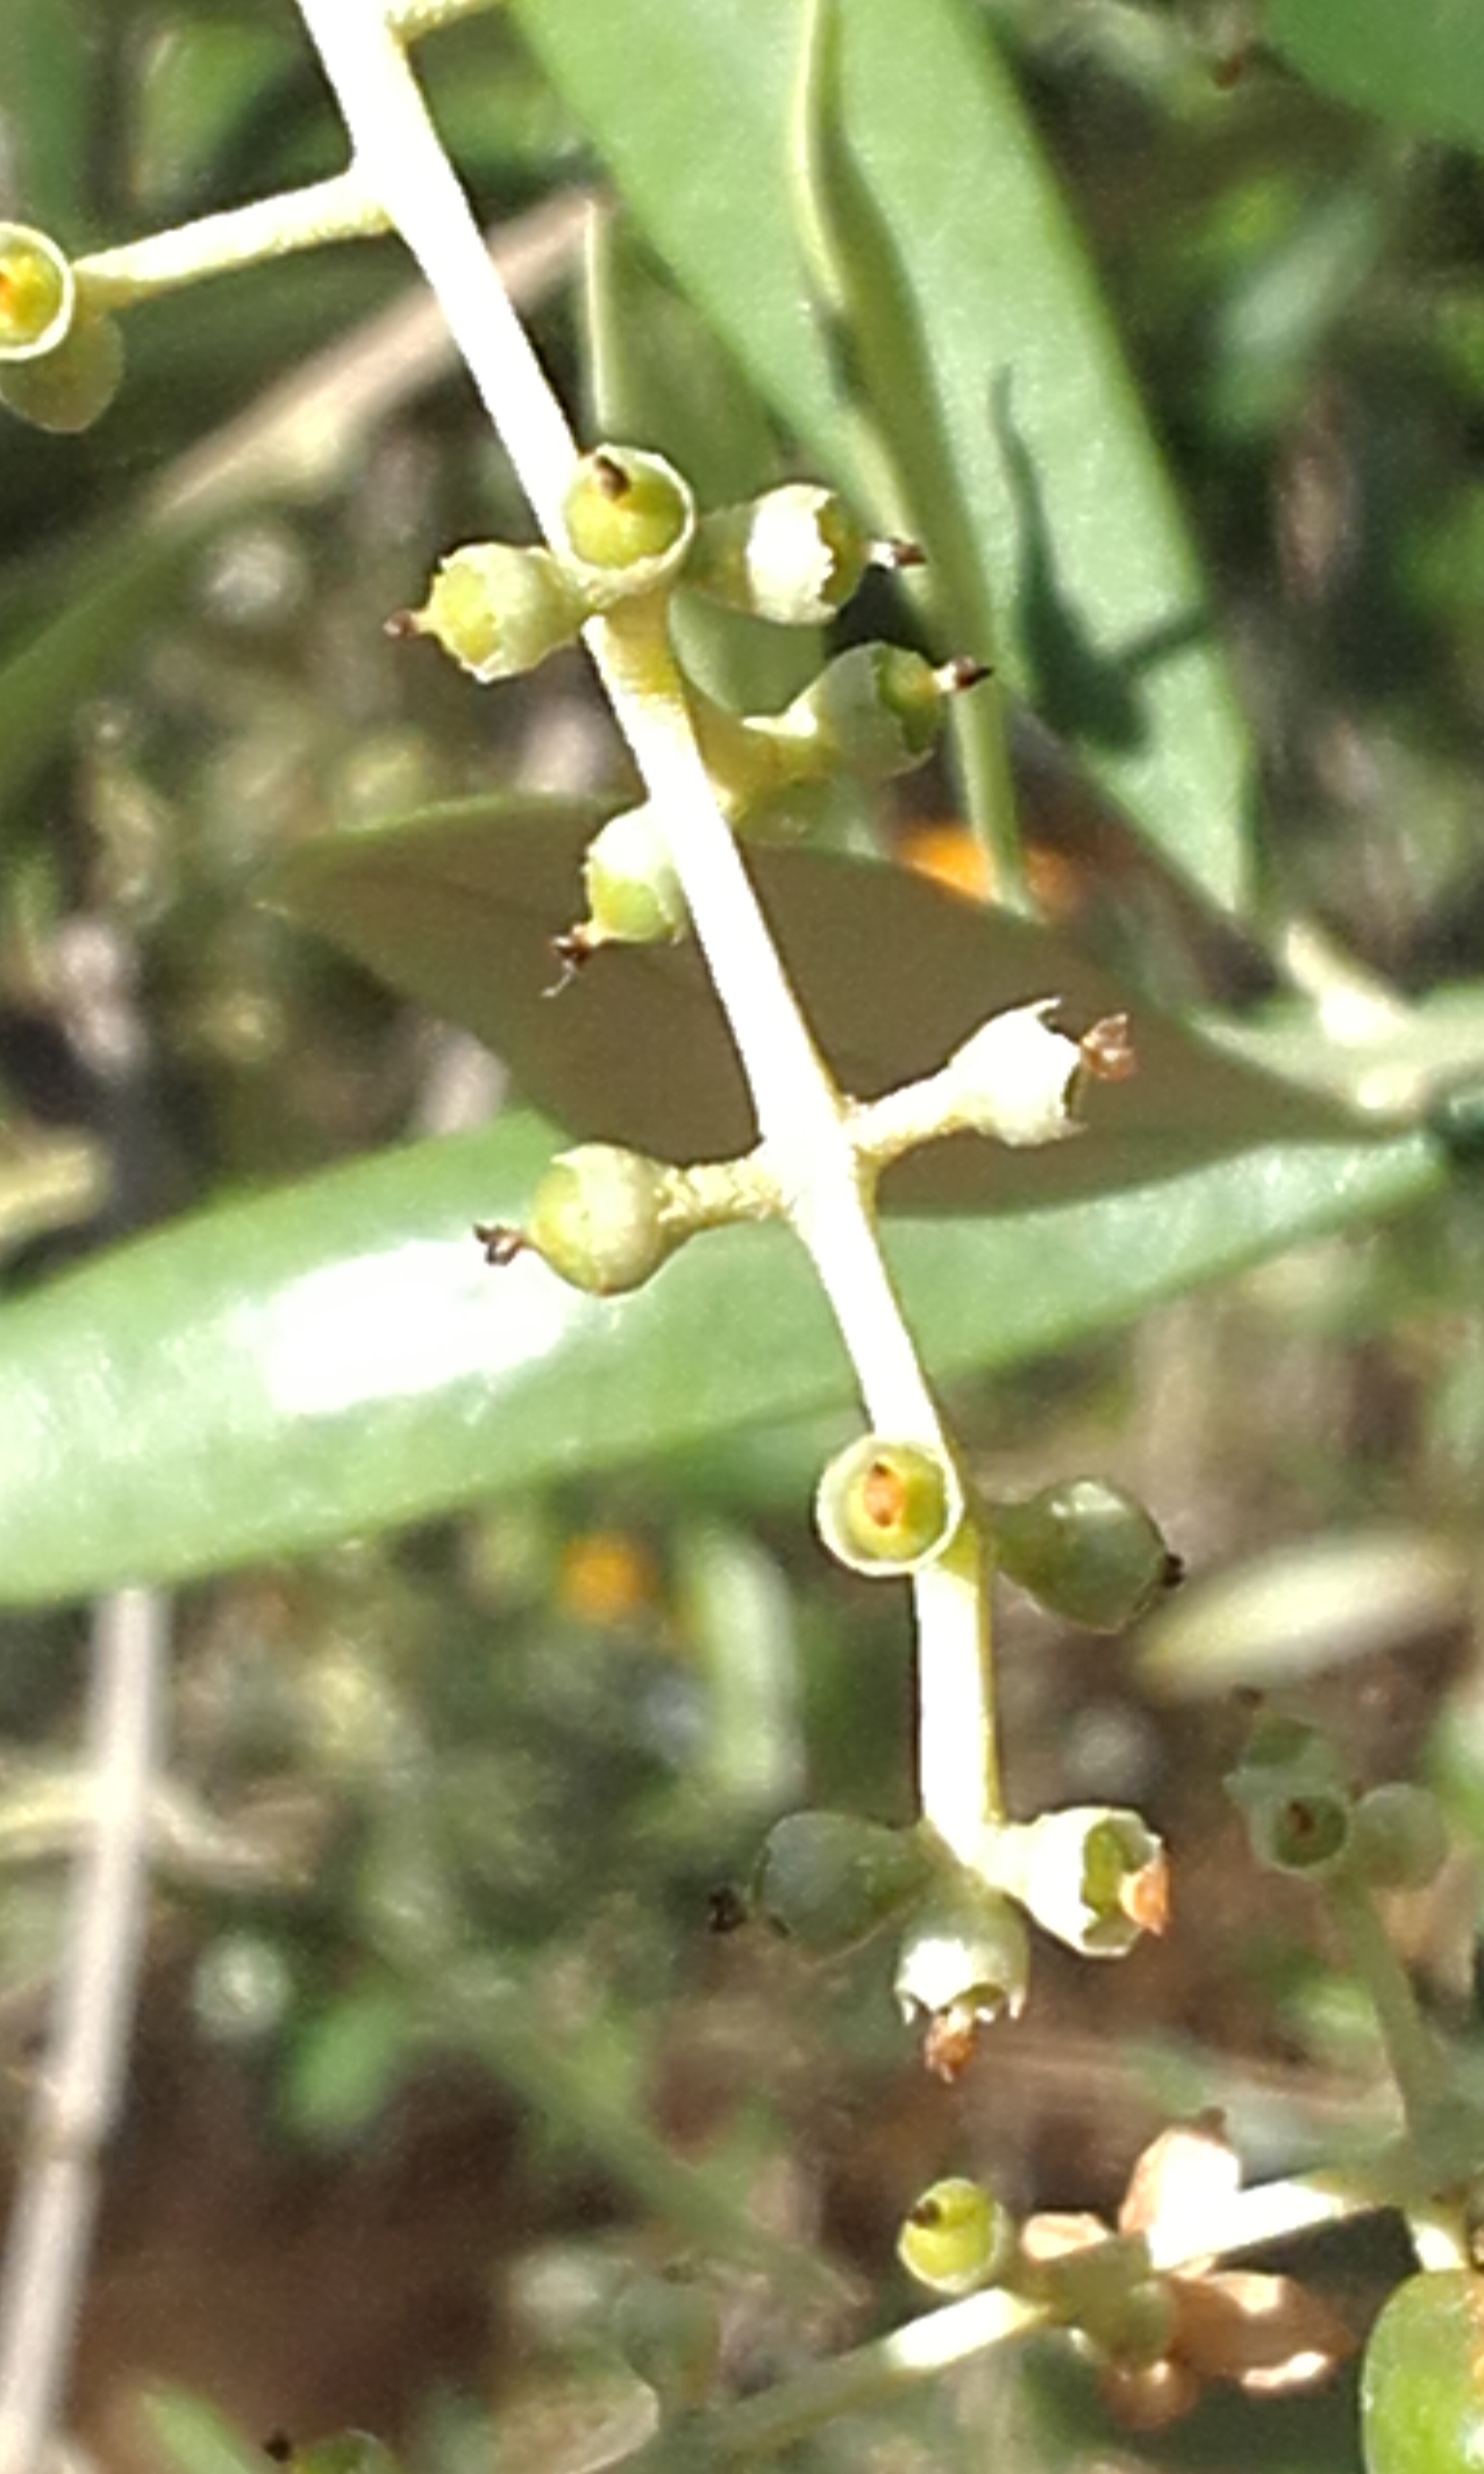 Keeping you up to date with the growth of our olives